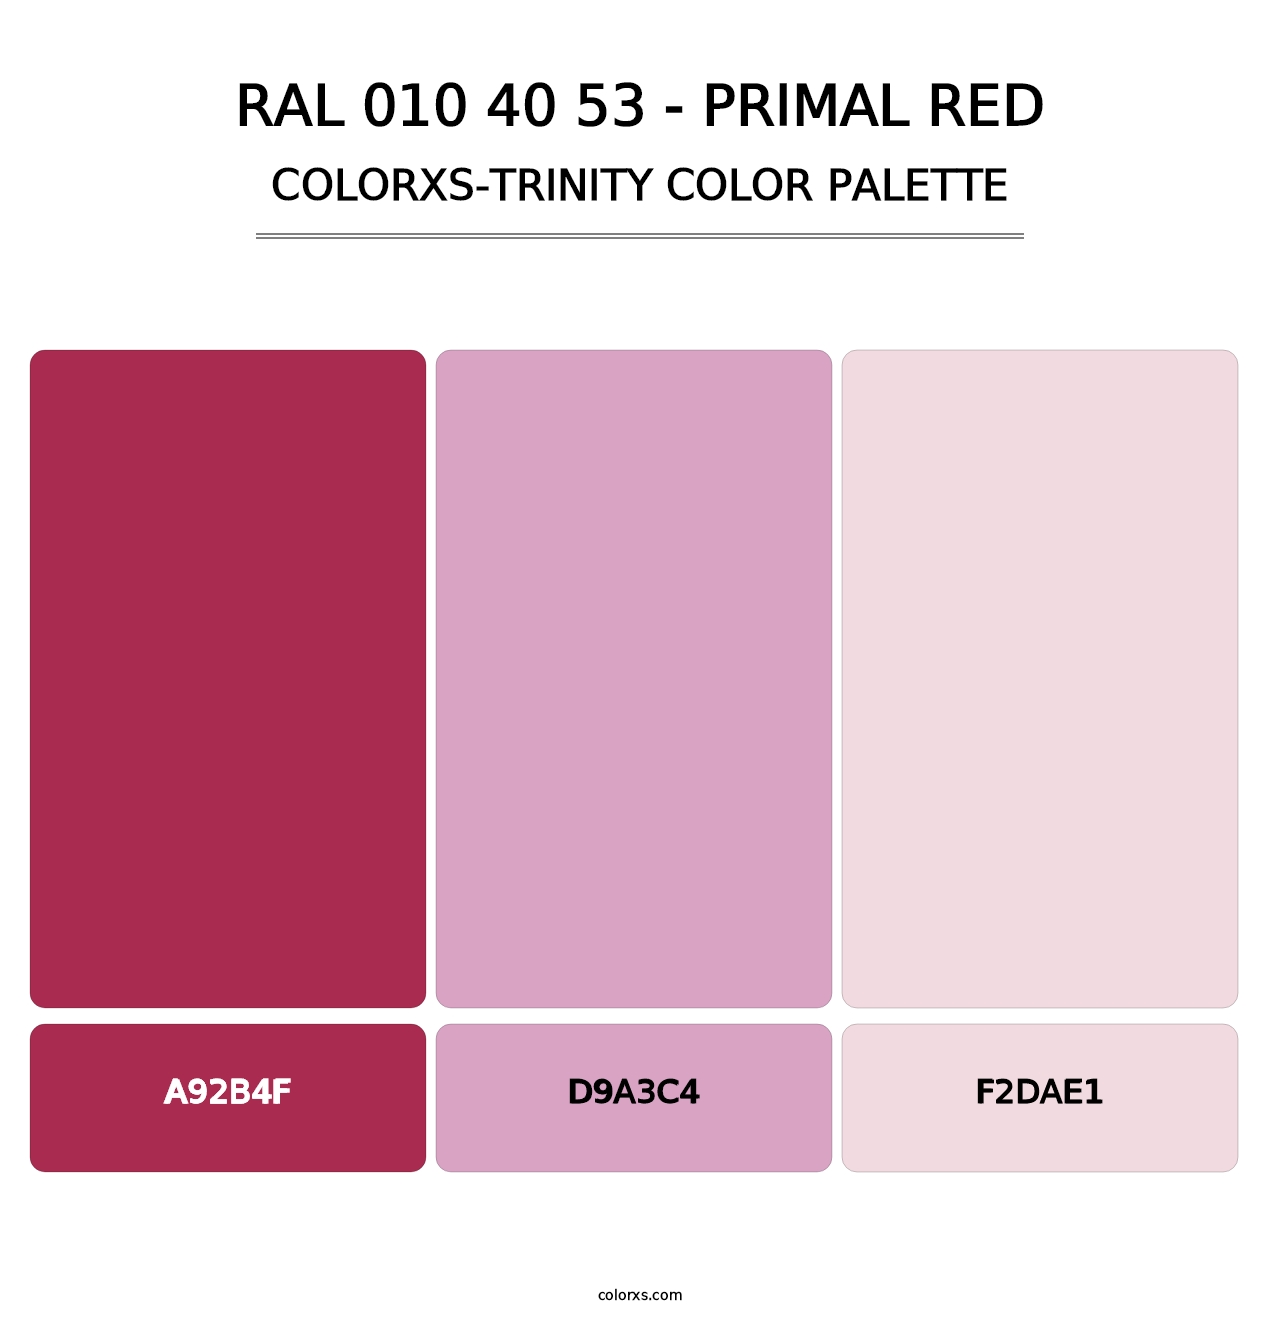 RAL 010 40 53 - Primal Red - Colorxs Trinity Palette